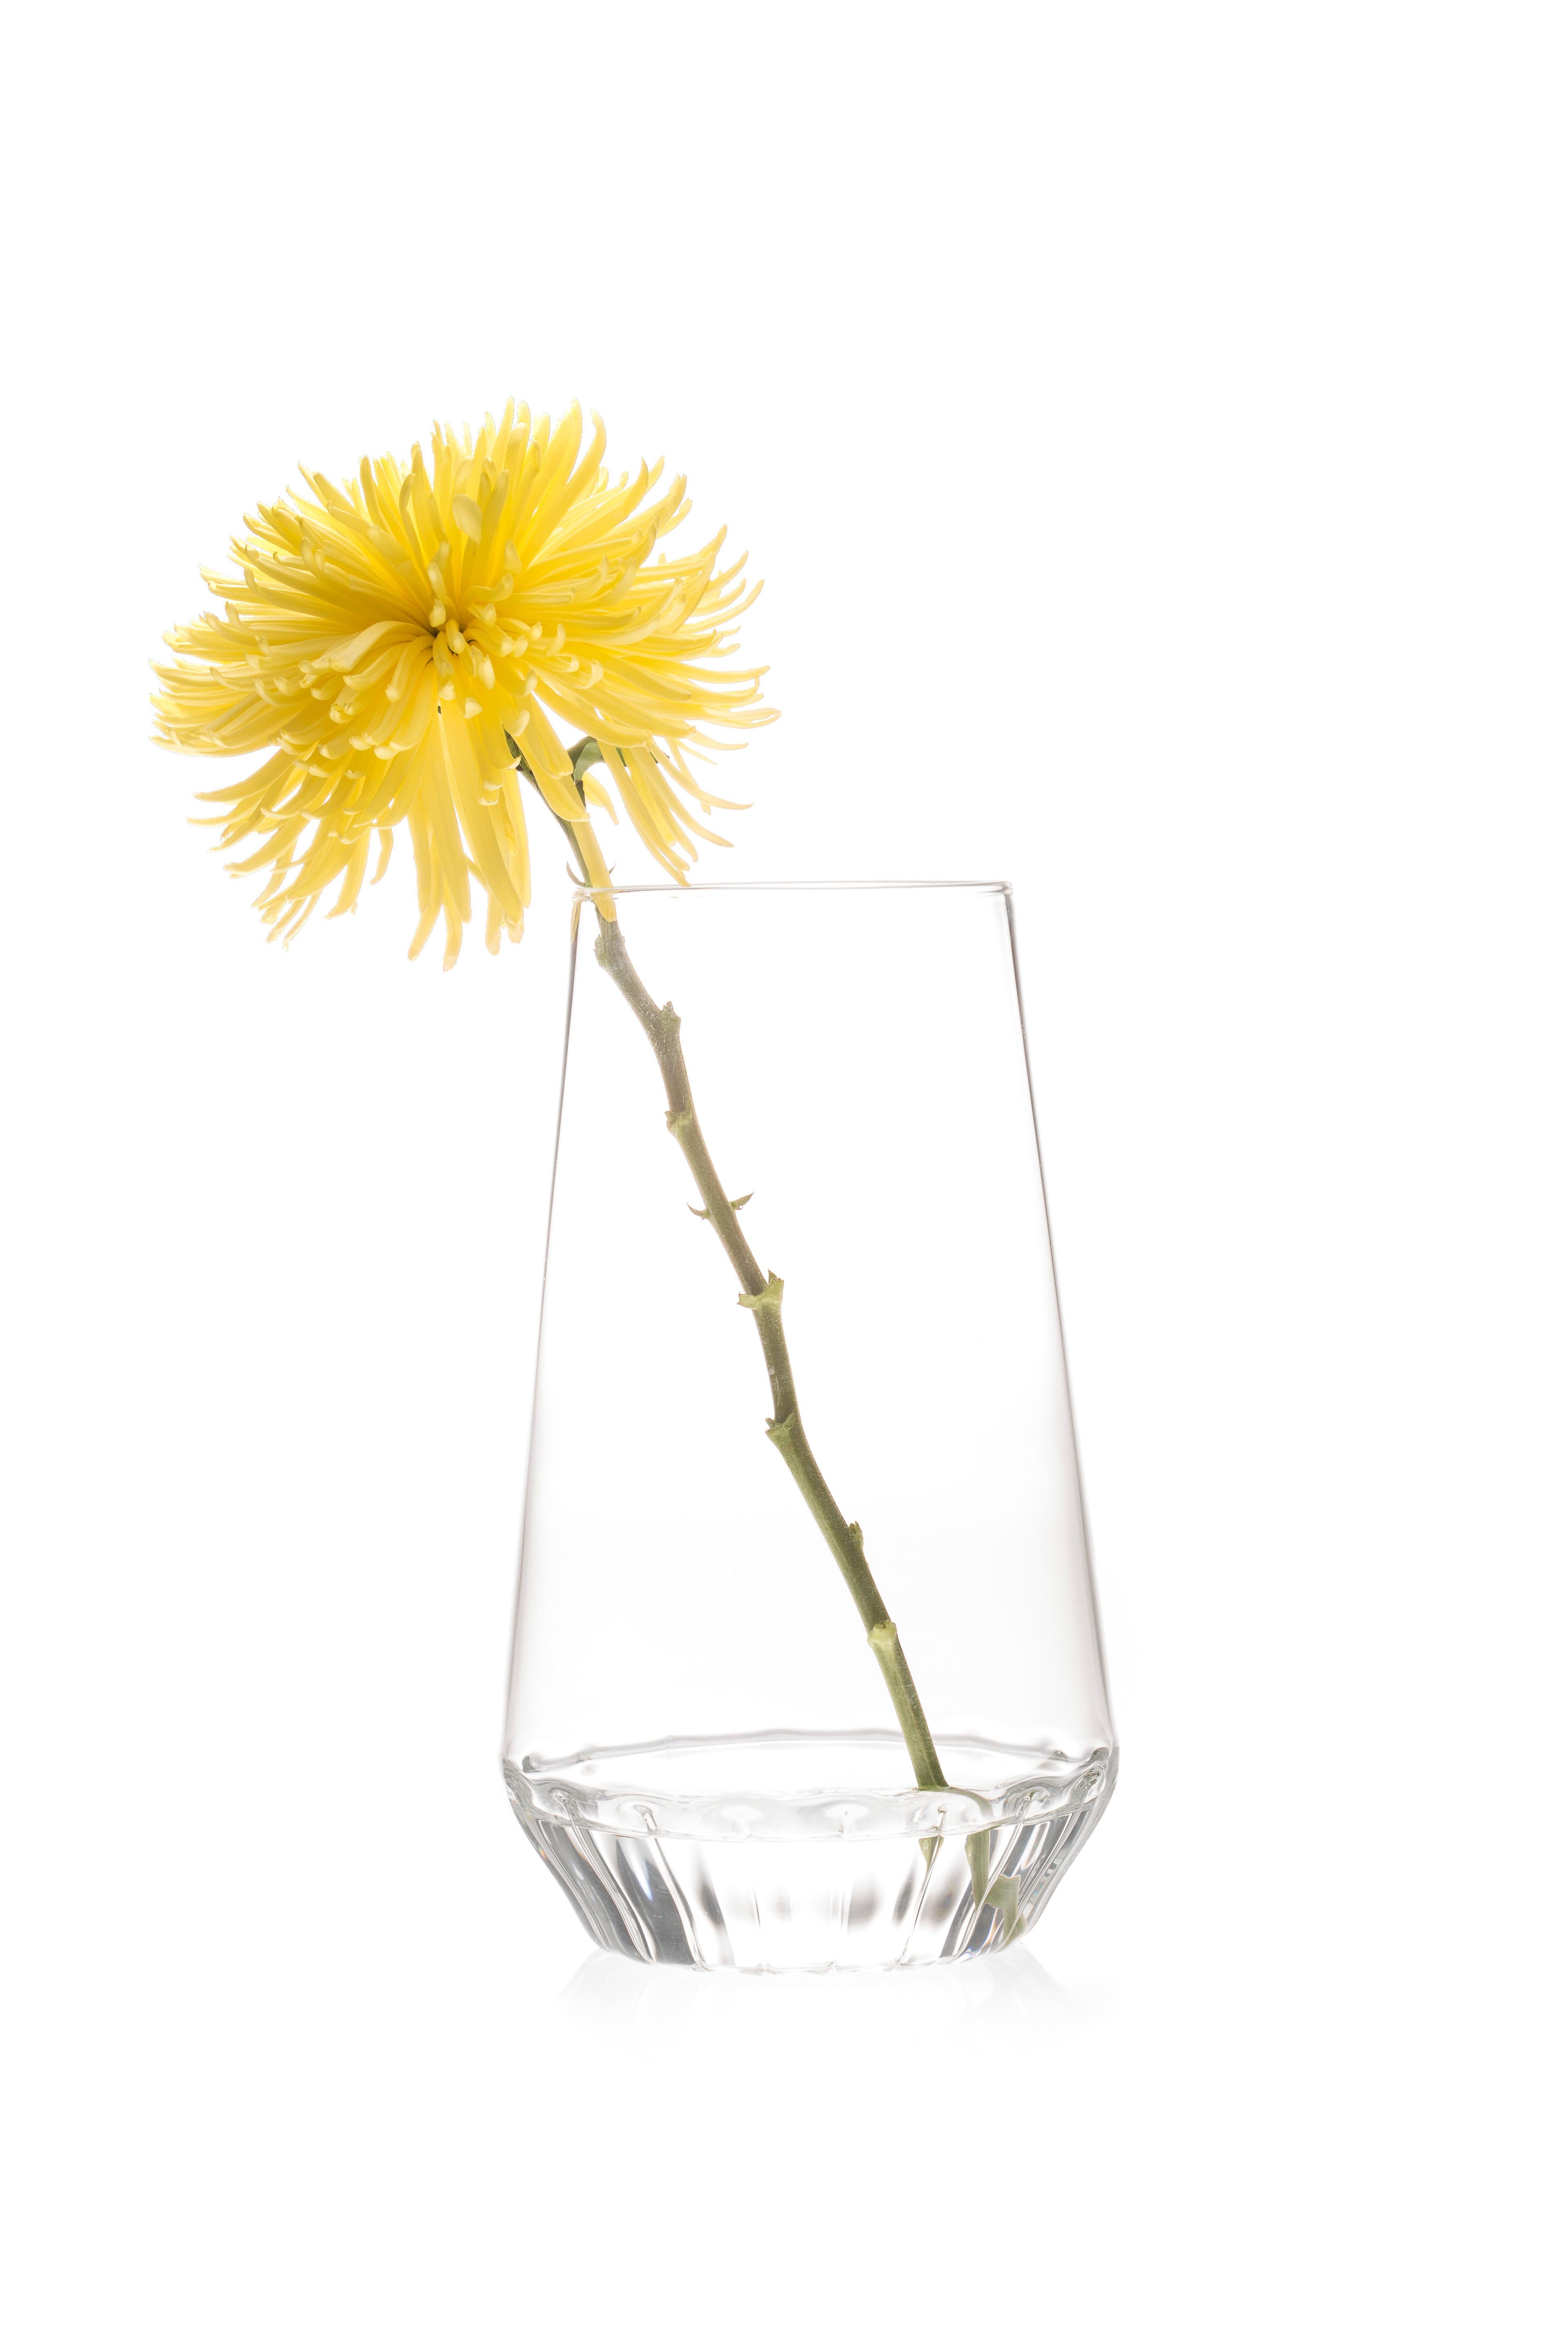 The Contemporary Czech clear glass Rossi large vase, from a single stem to a beautiful bouquet, the modern and minimal Rossi vases highlight any flower arrangement they contain by masking the stems at the bottom of the vase. For everyday use or